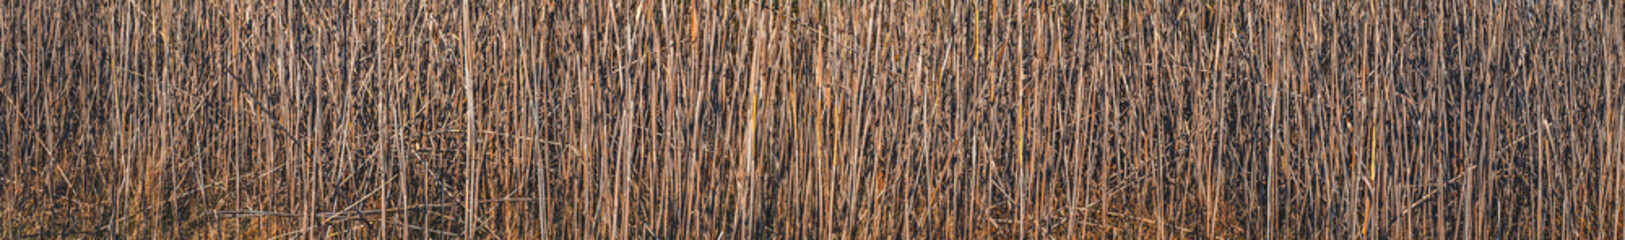 Dry reeds texture background in nature.